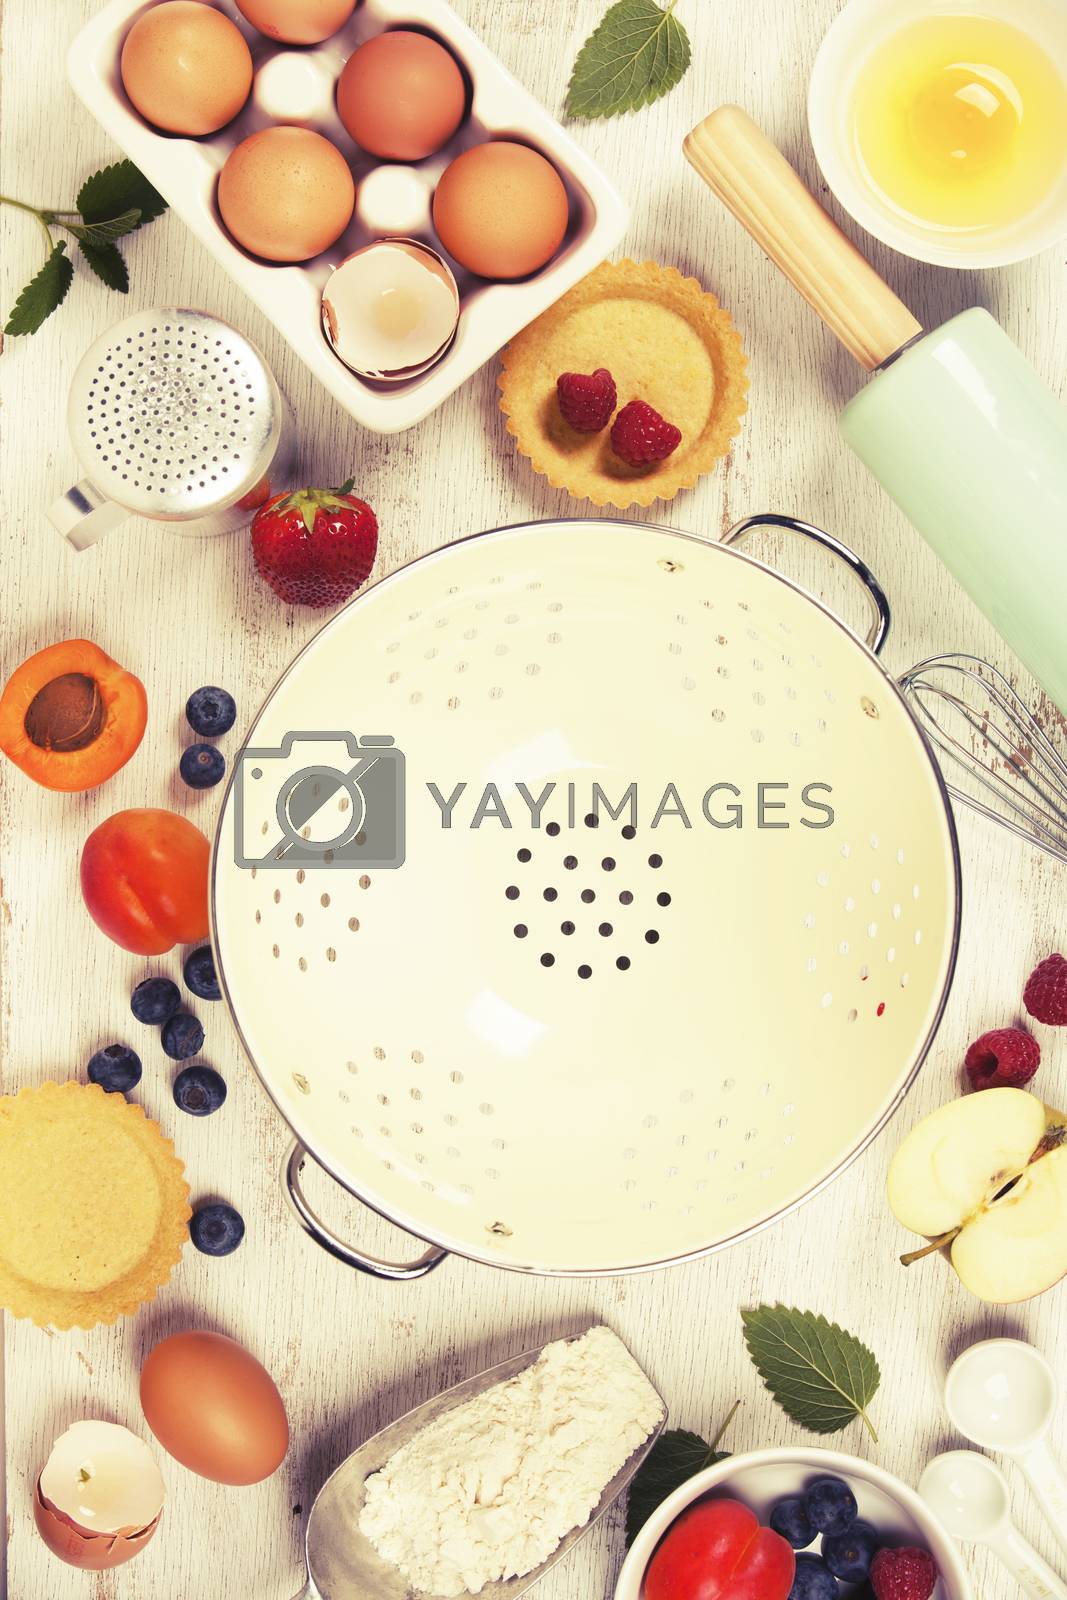 Antique colander, Baking tools and ingredients - flour, rolling pin, eggs, measuring spoons, fruits and berries on vintage wood table. Top view. Rustic background with free text space